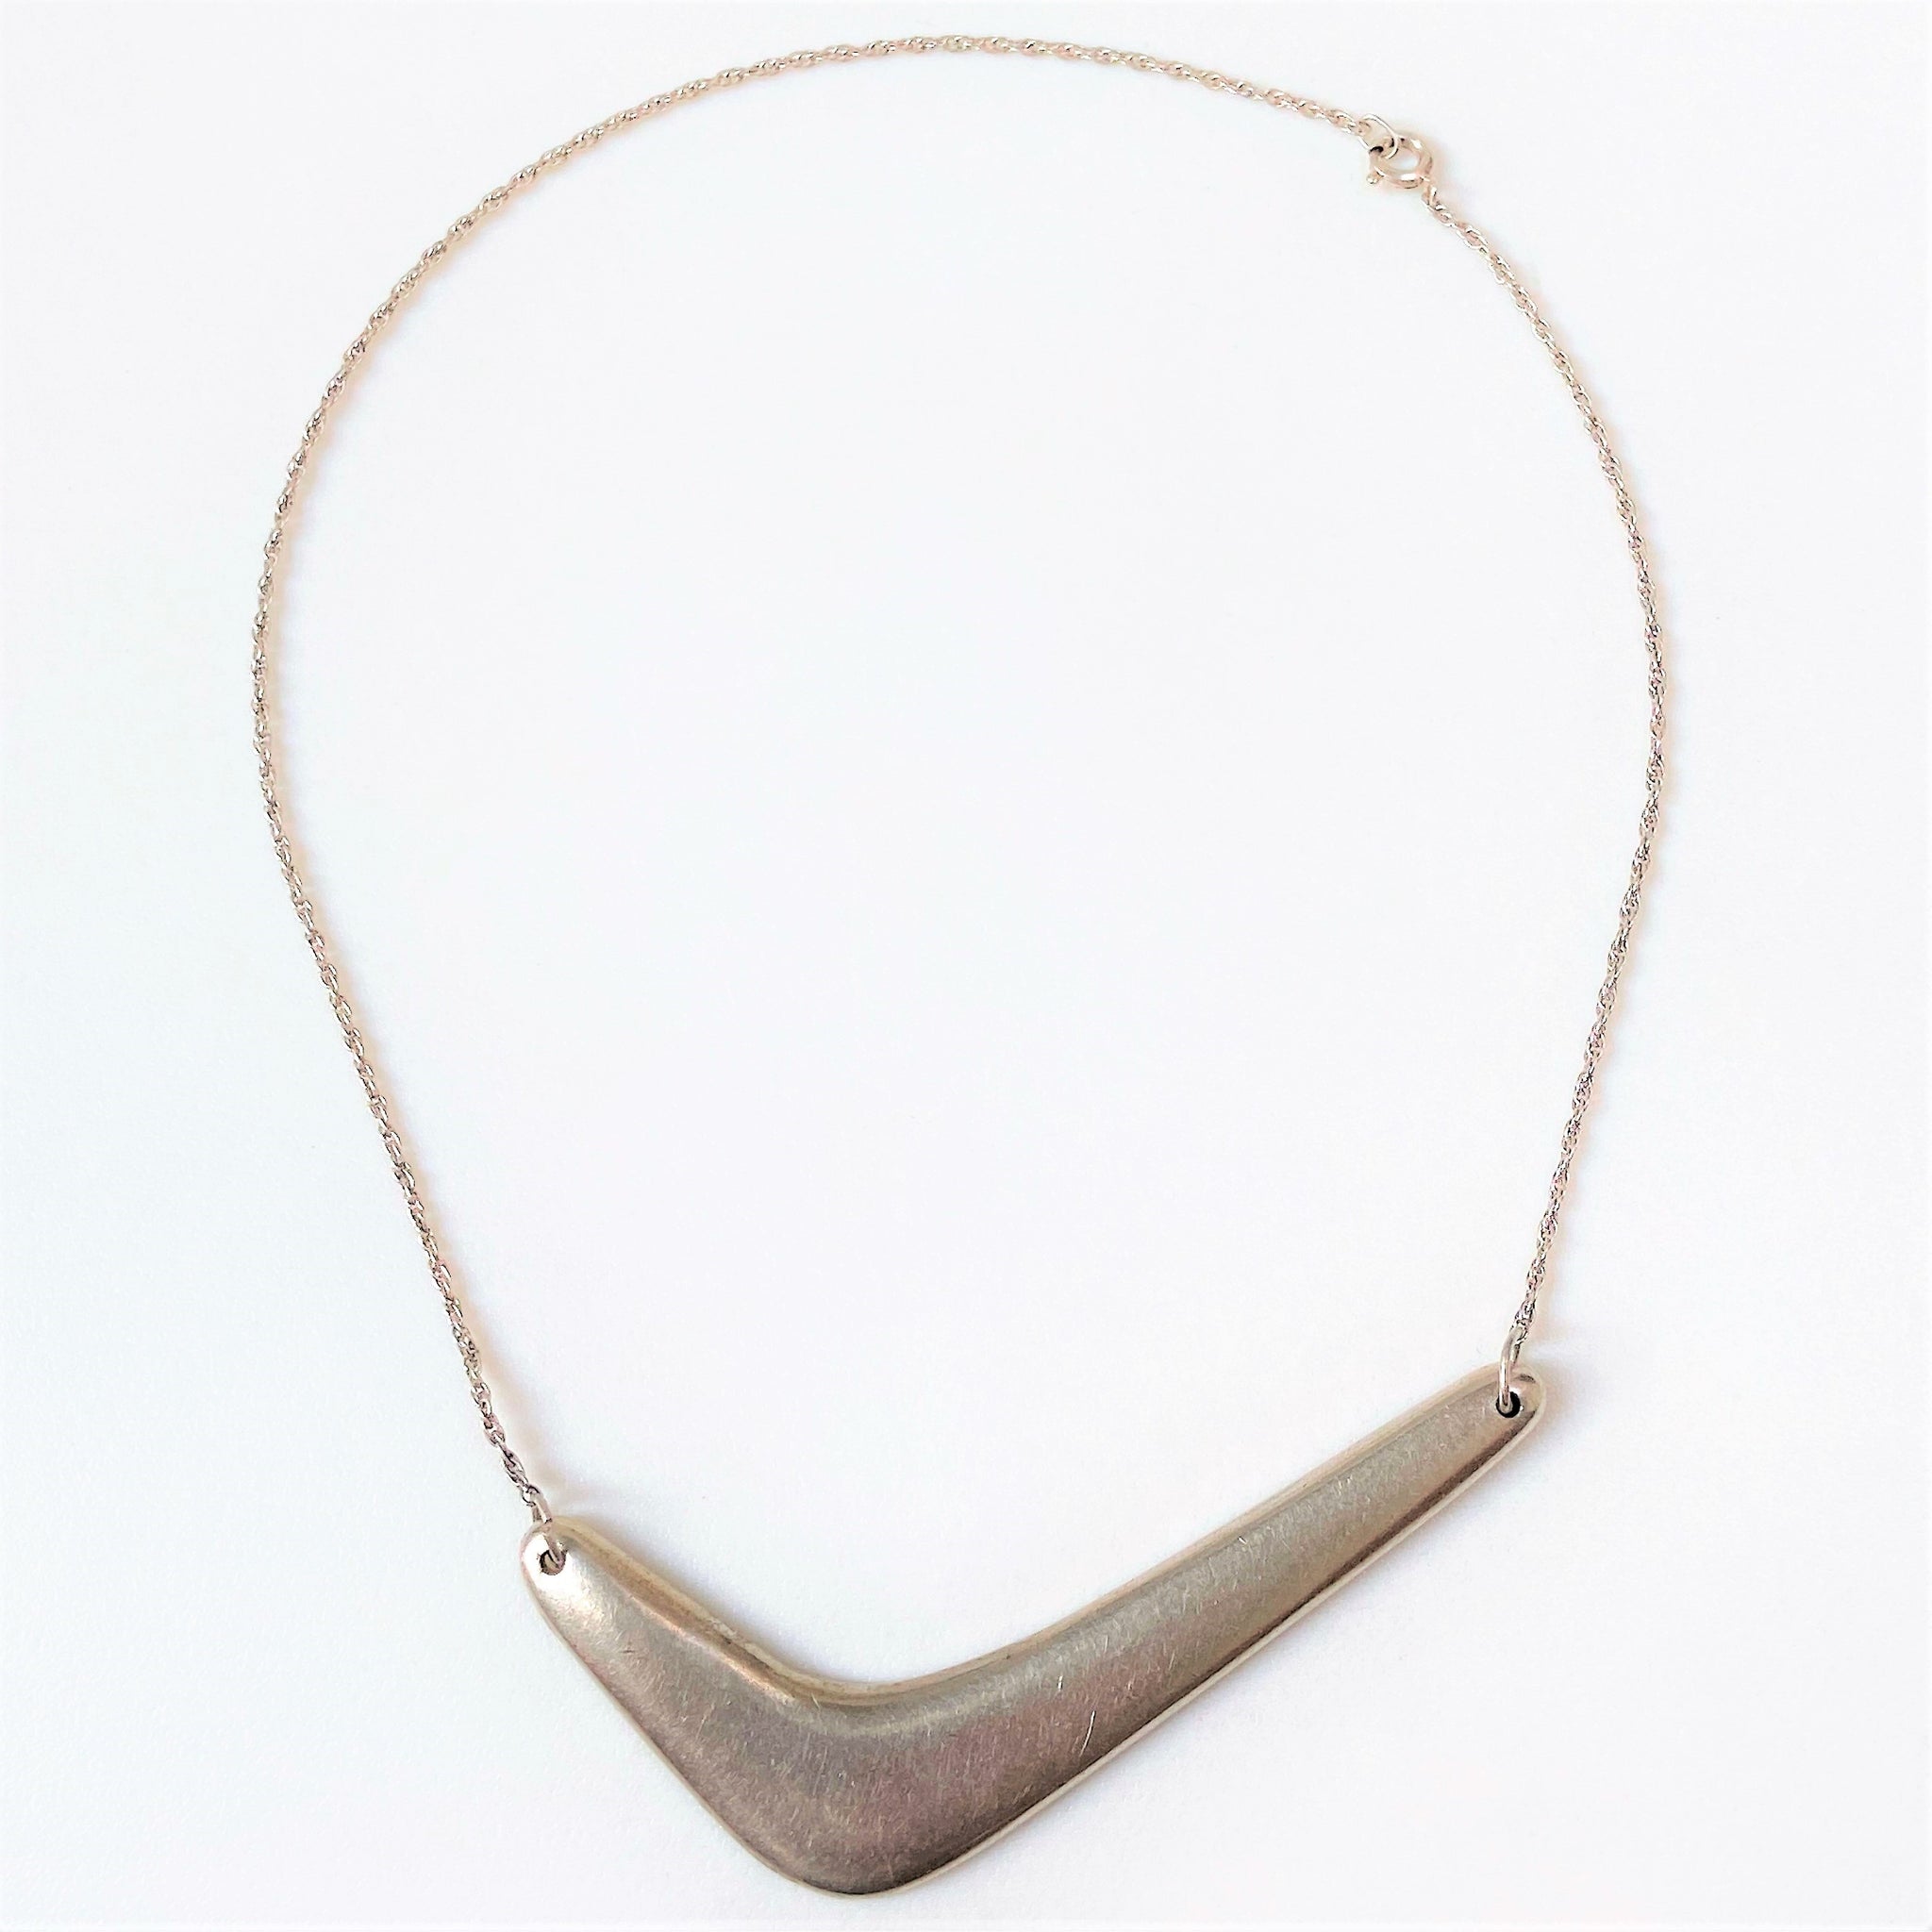 Modernist Style Silver Necklace